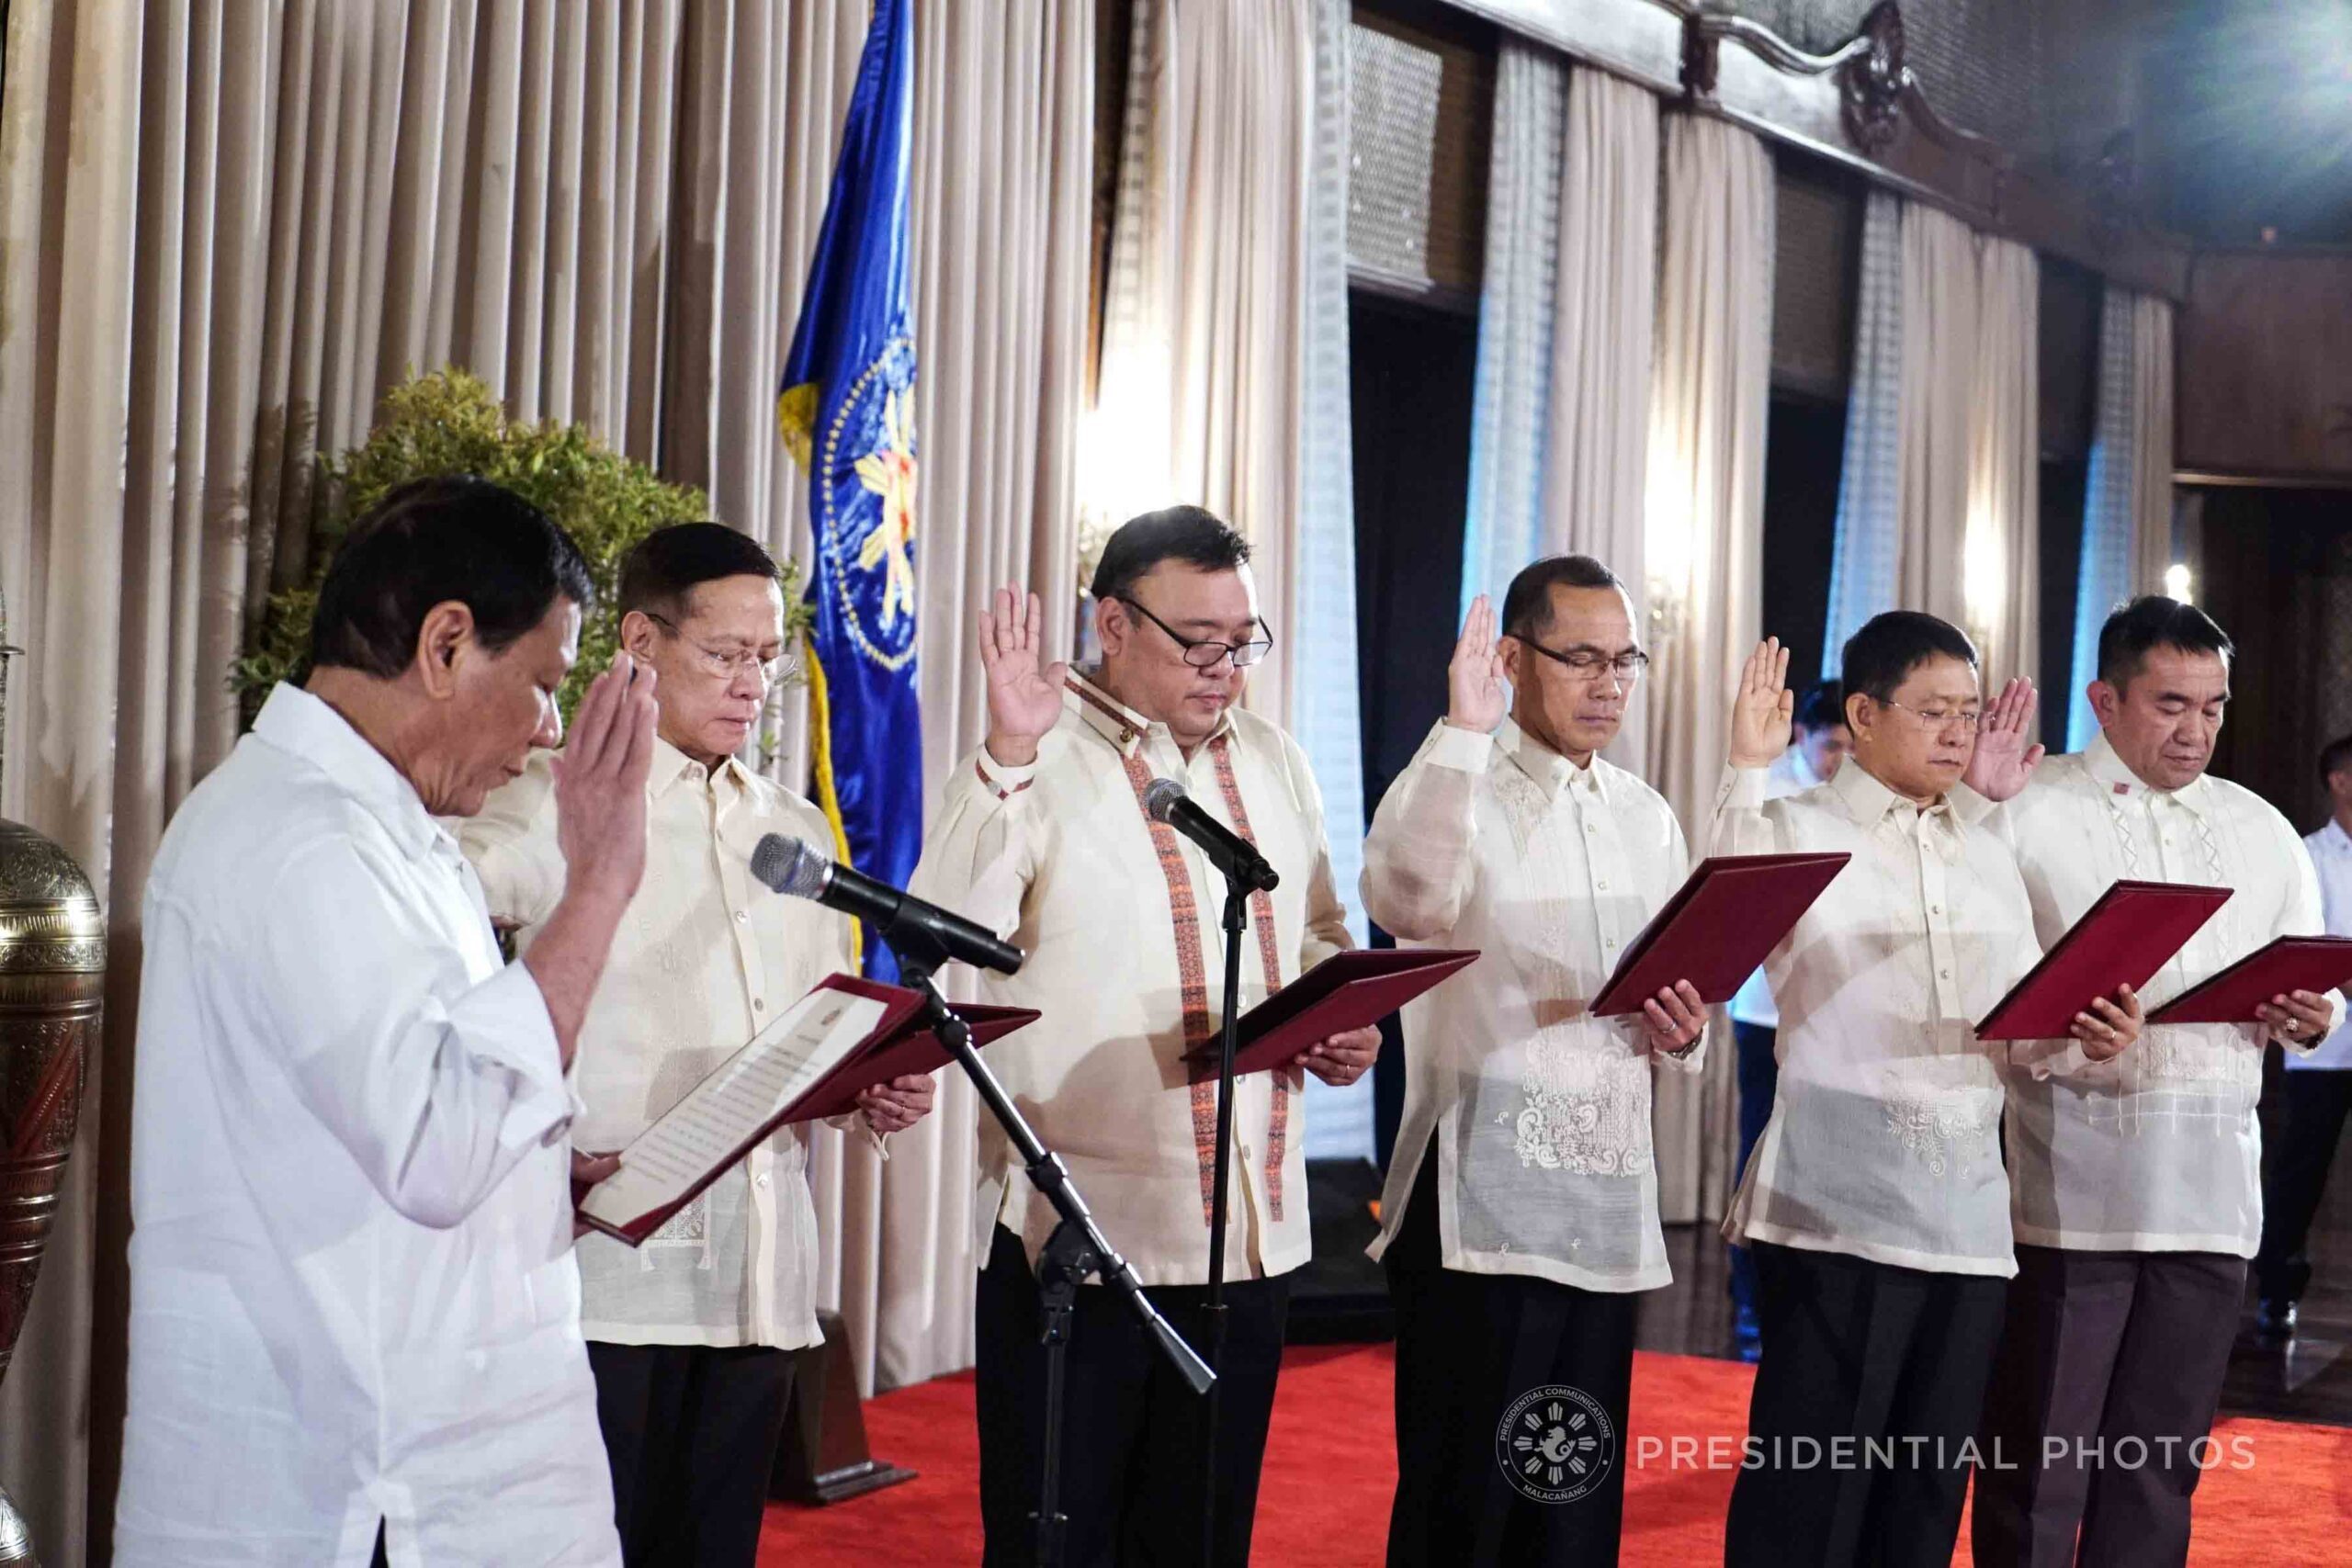 Roque on bloggers’ call for resignation: Take it up with Duterte